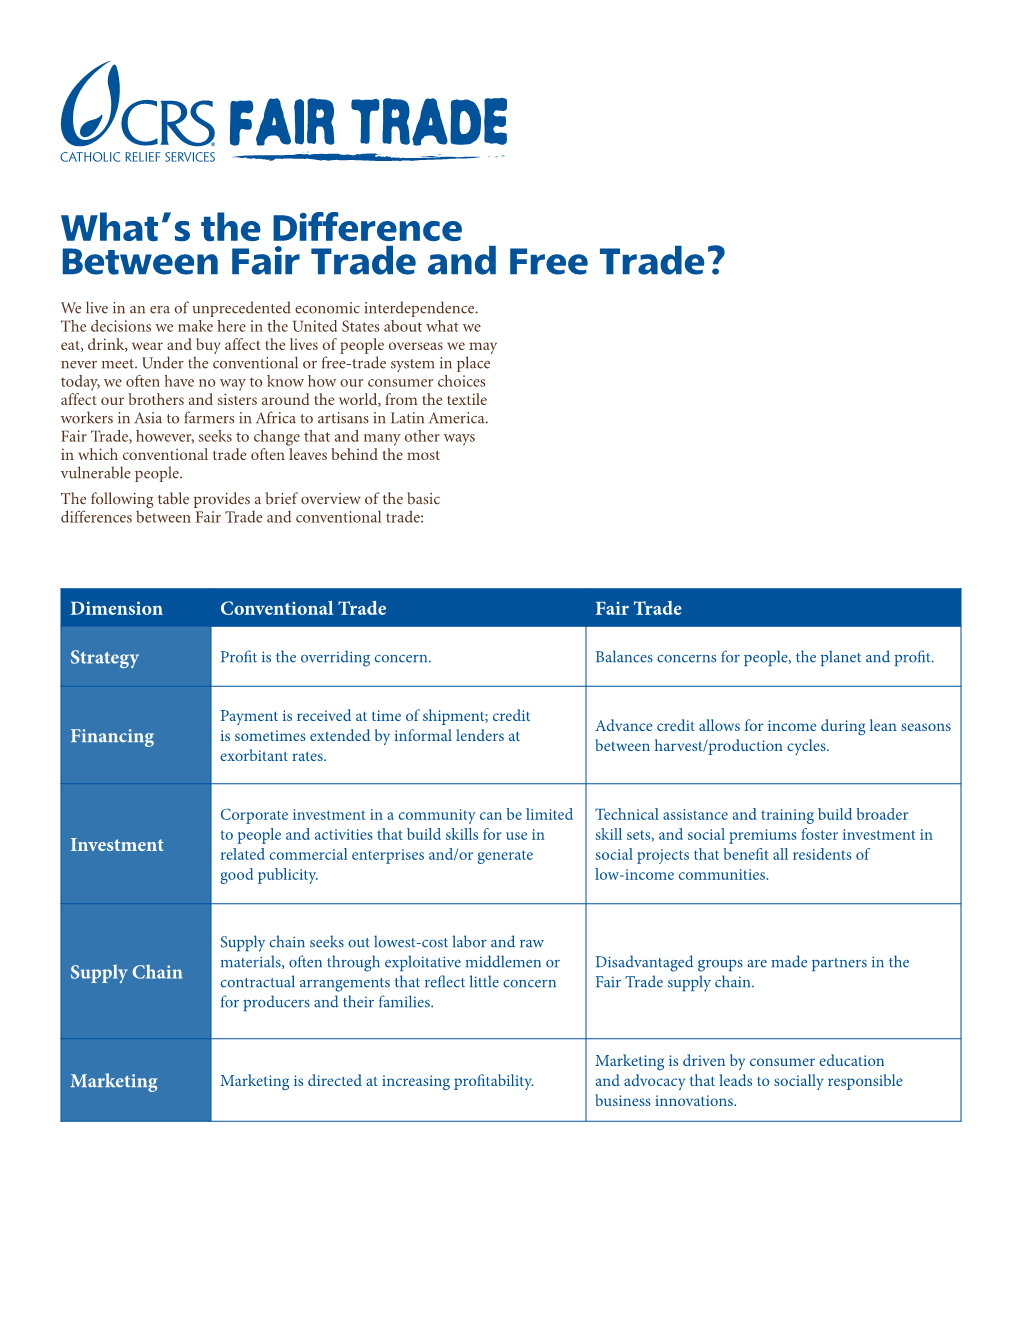 What's the Difference Between Fair Trade and Free Trade?